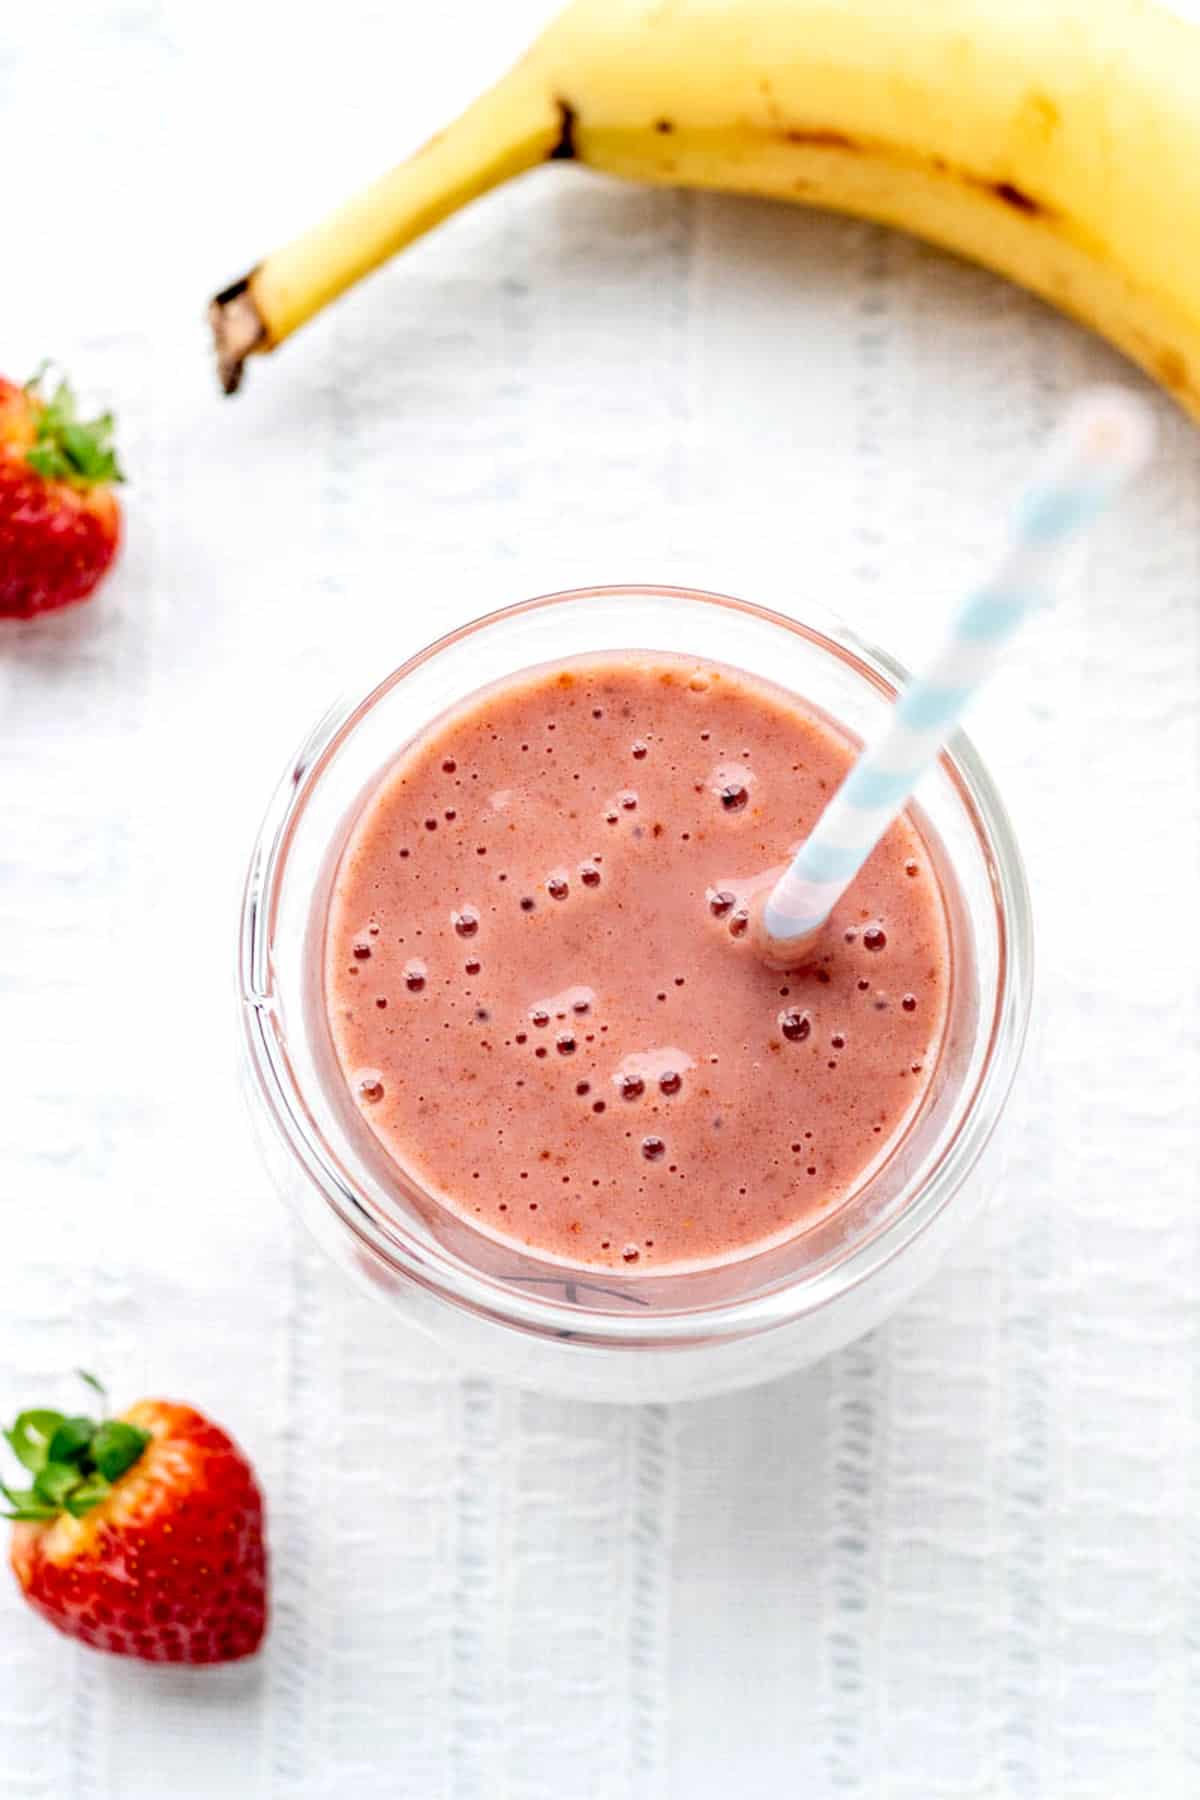 An overhead image of the strawberry banana smoothie in a glass with a straw next to a banana and strawberries.